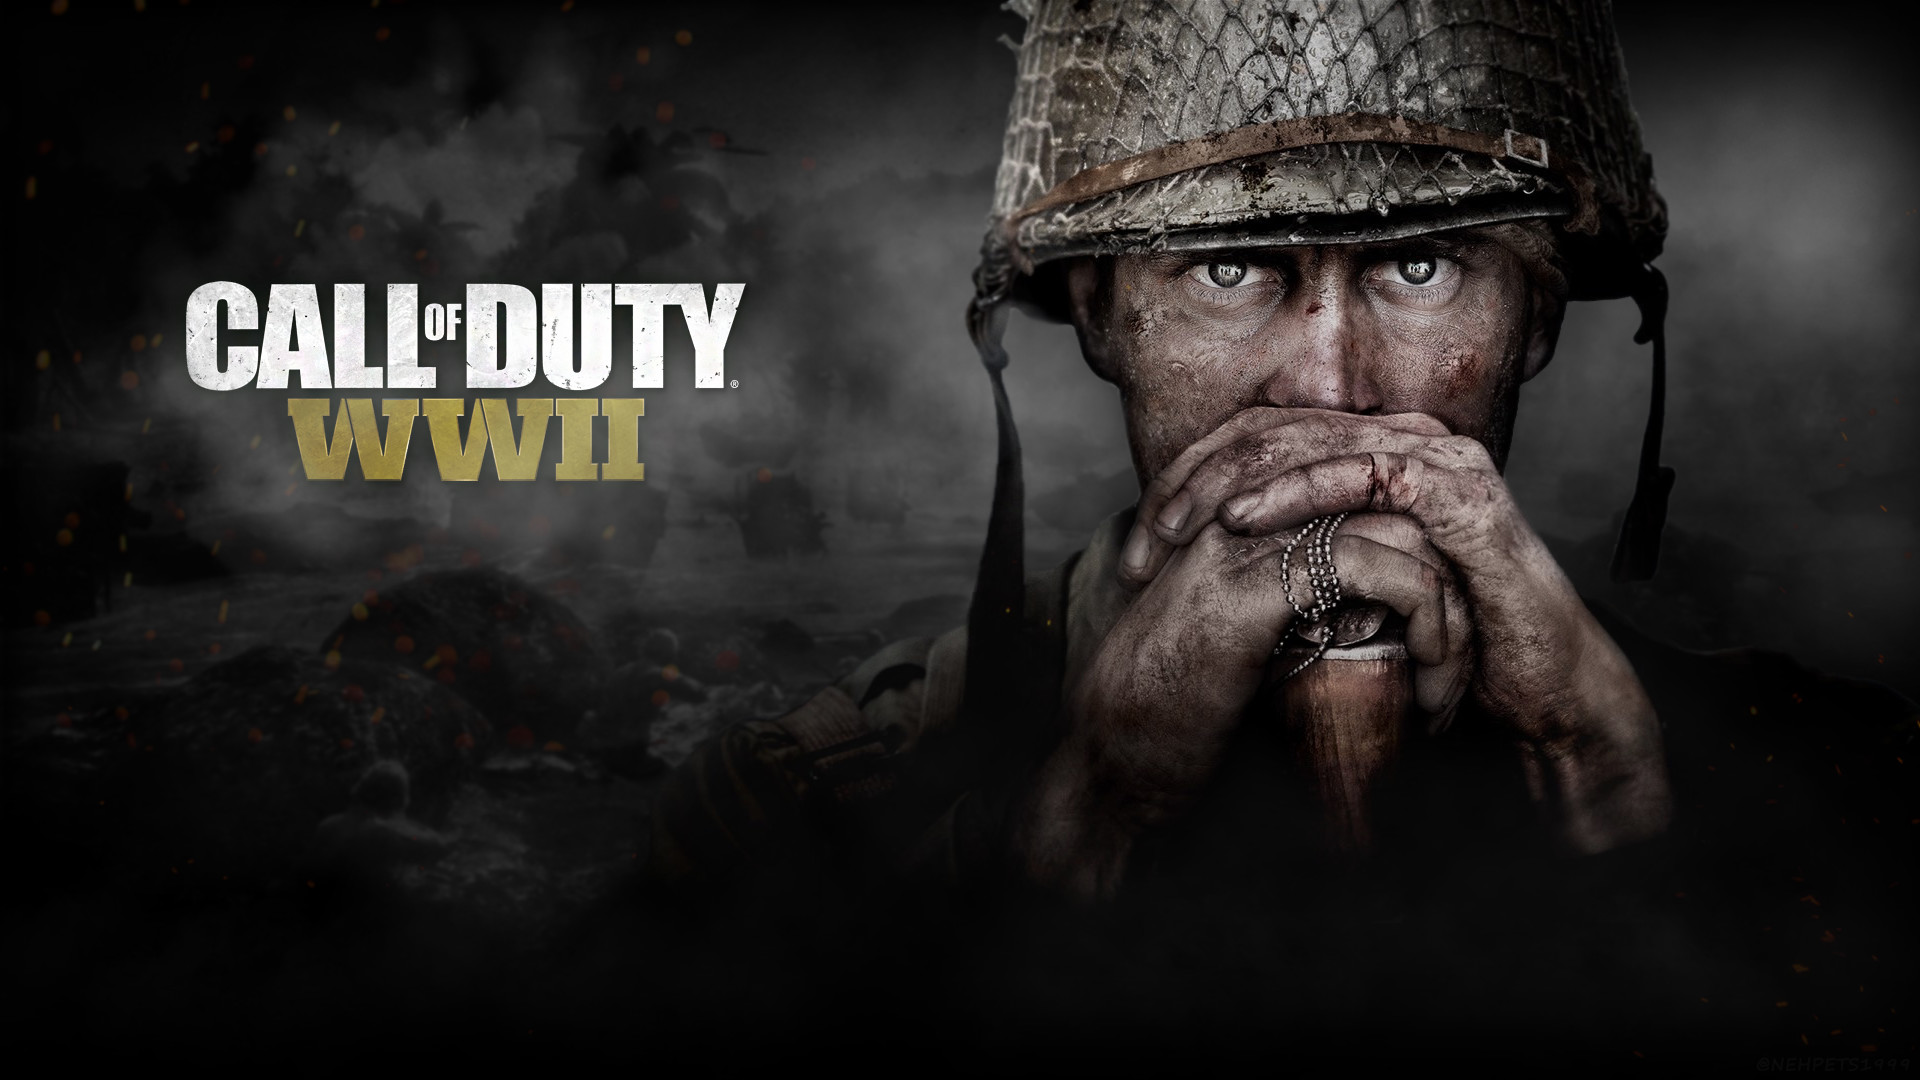 1920x1080 Call of Duty WWII Wallpaper 61207